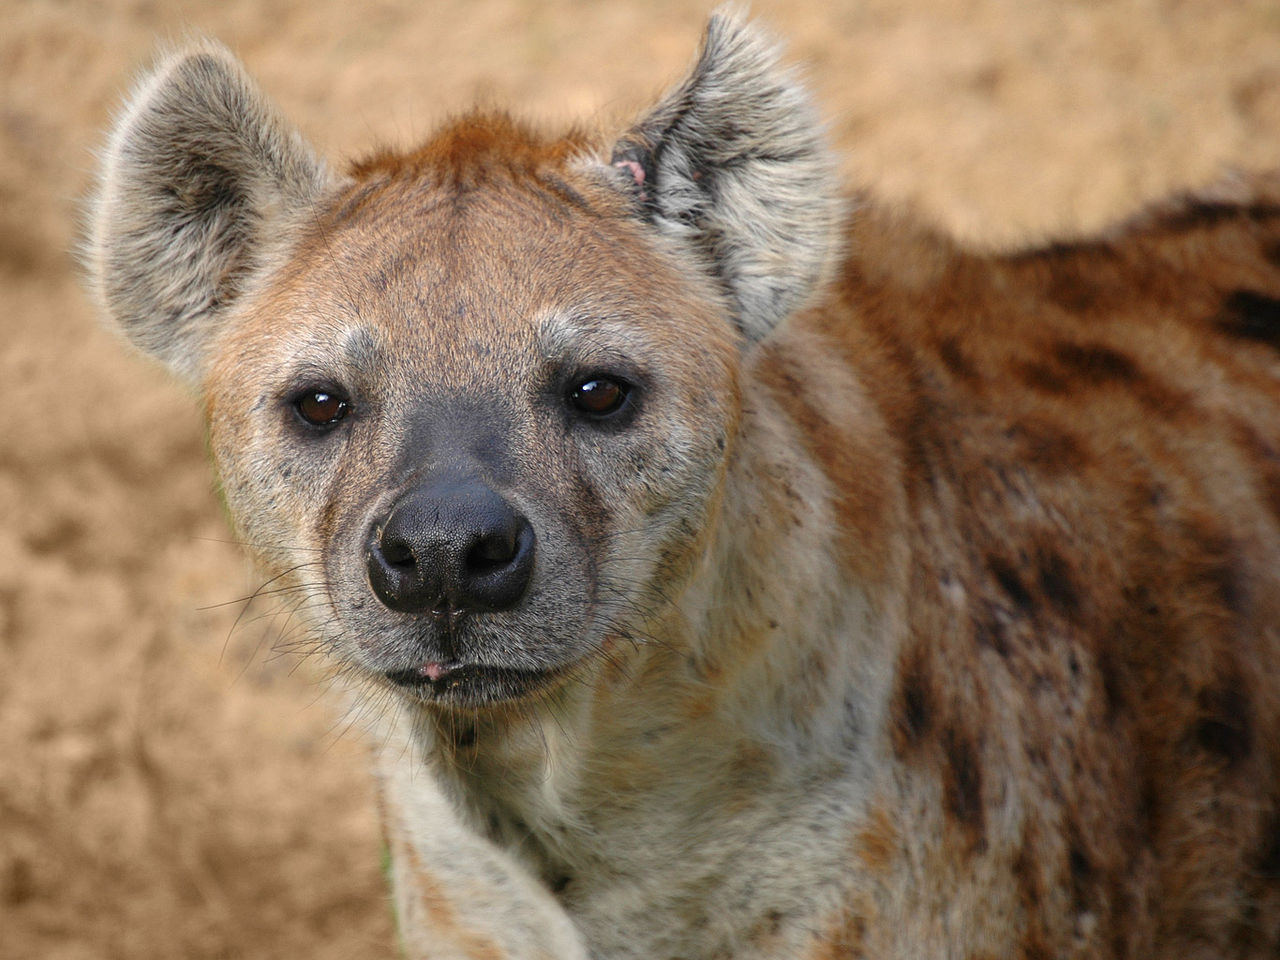 1280px-Hyena FEATURED Photo by Marieke Kuijpers posted on flickr